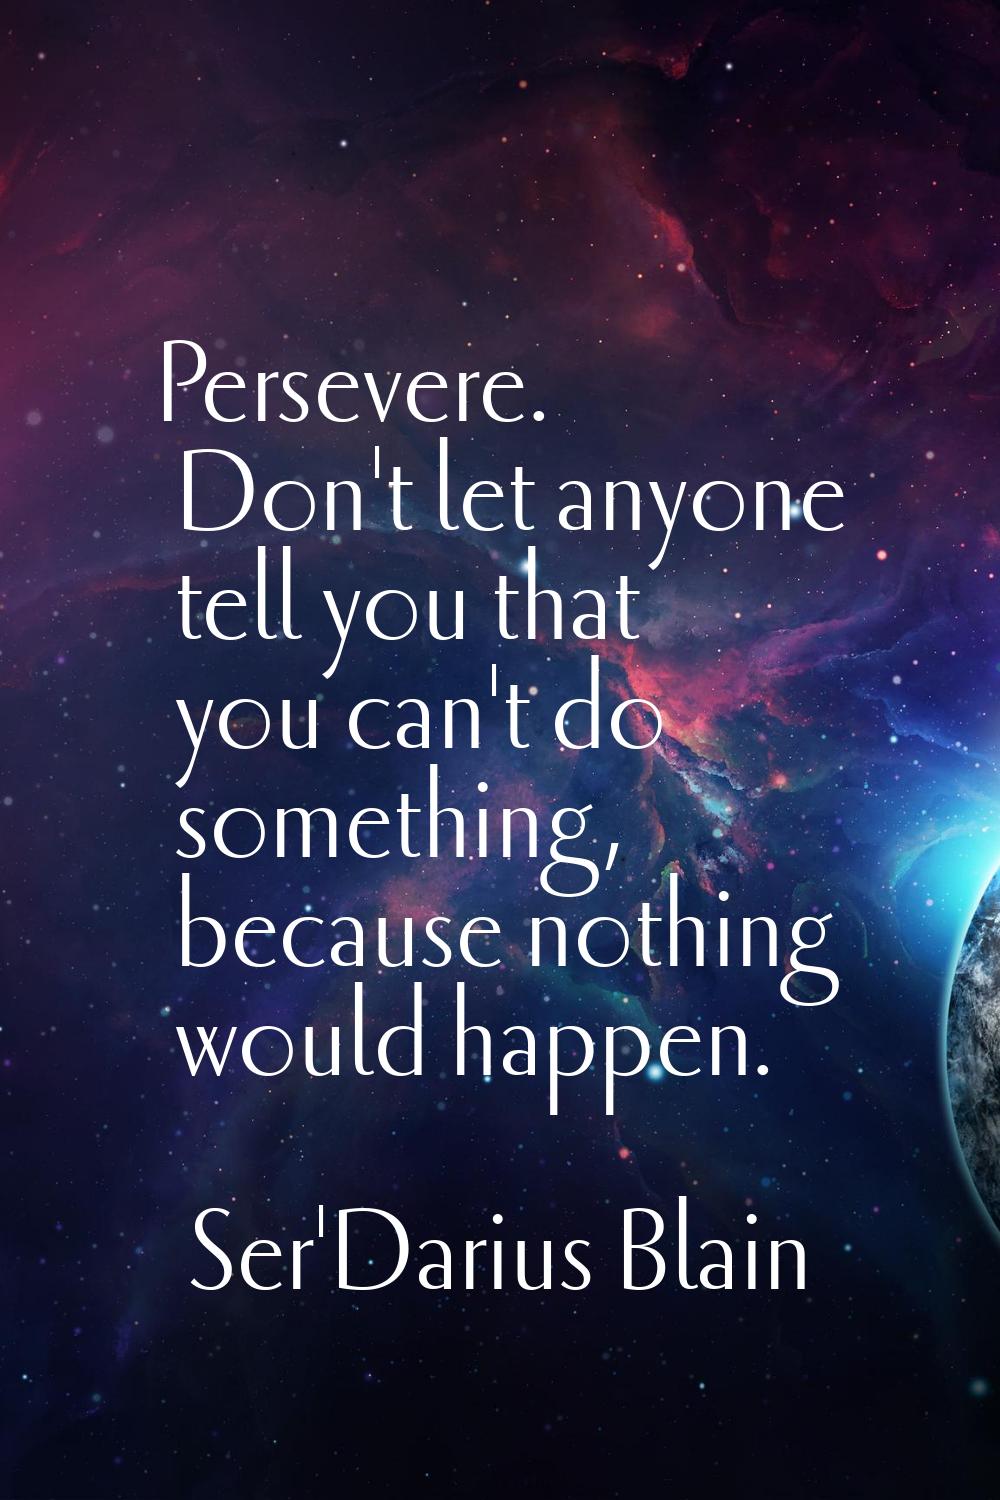 Persevere. Don't let anyone tell you that you can't do something, because nothing would happen.